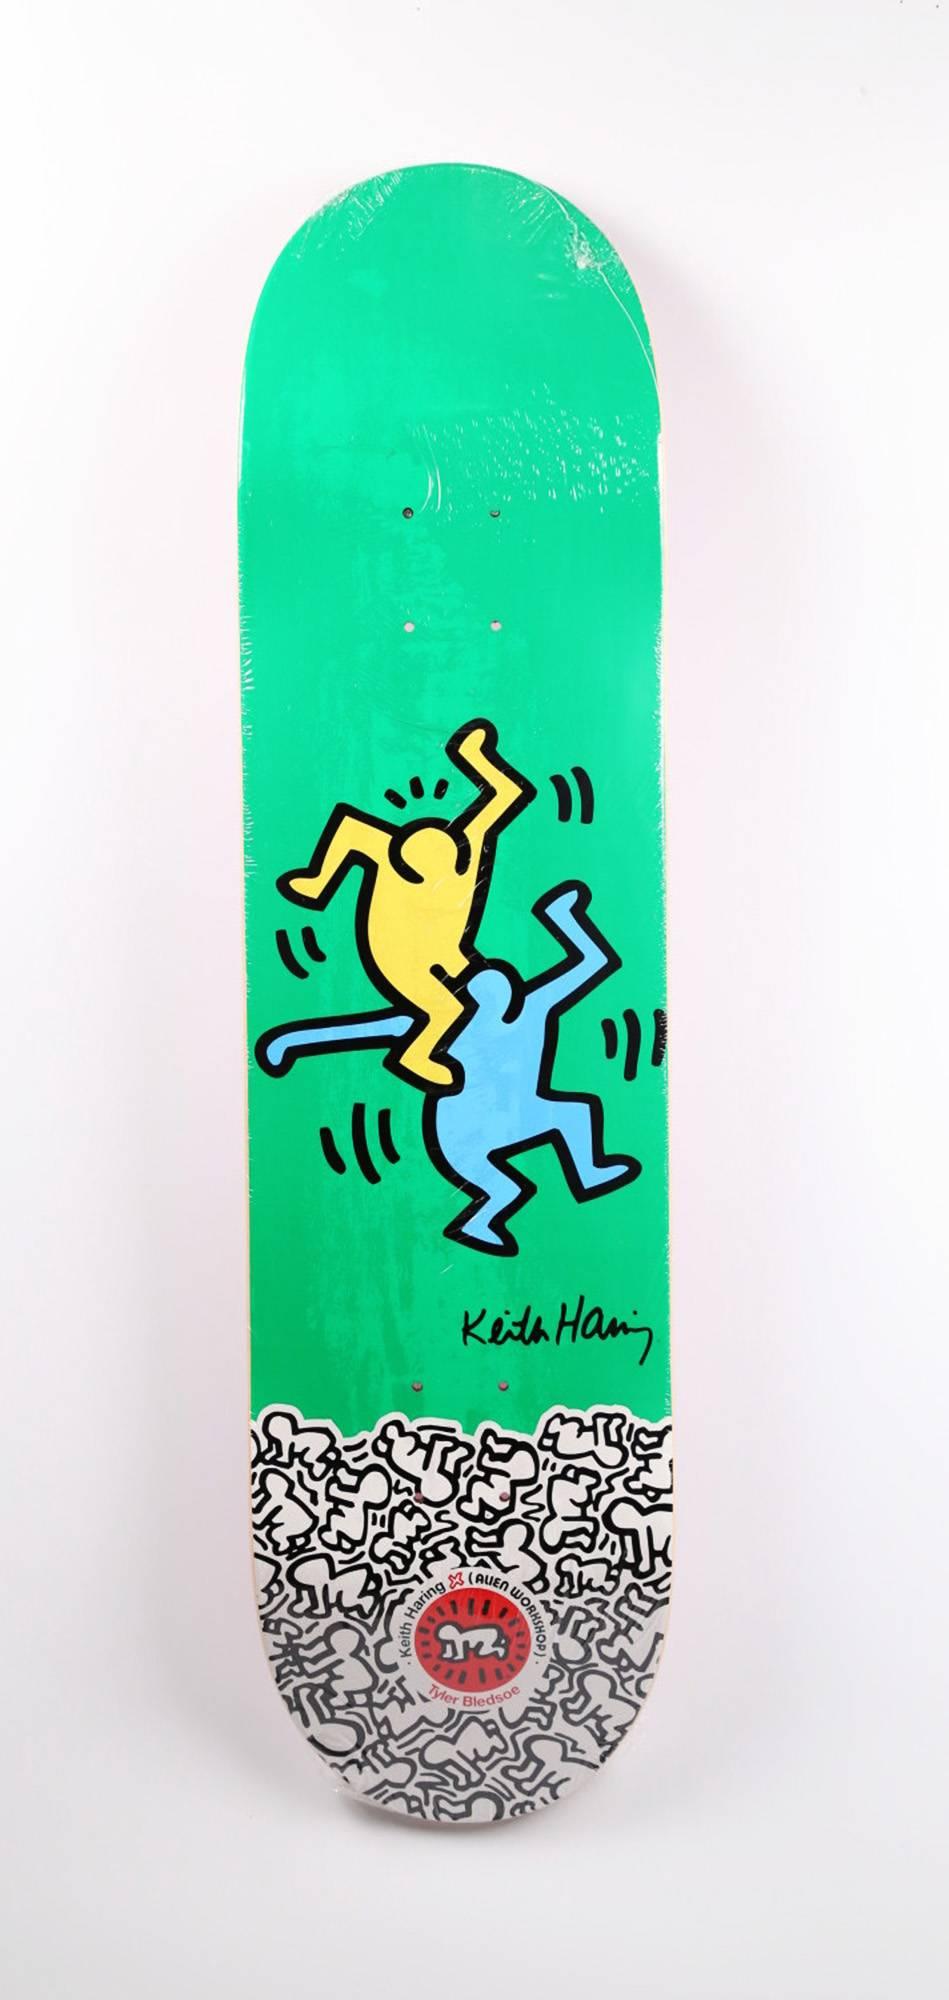 Keith Haring complete set of 10 skateboard decks (new) - Pop Art Art by (after) Keith Haring